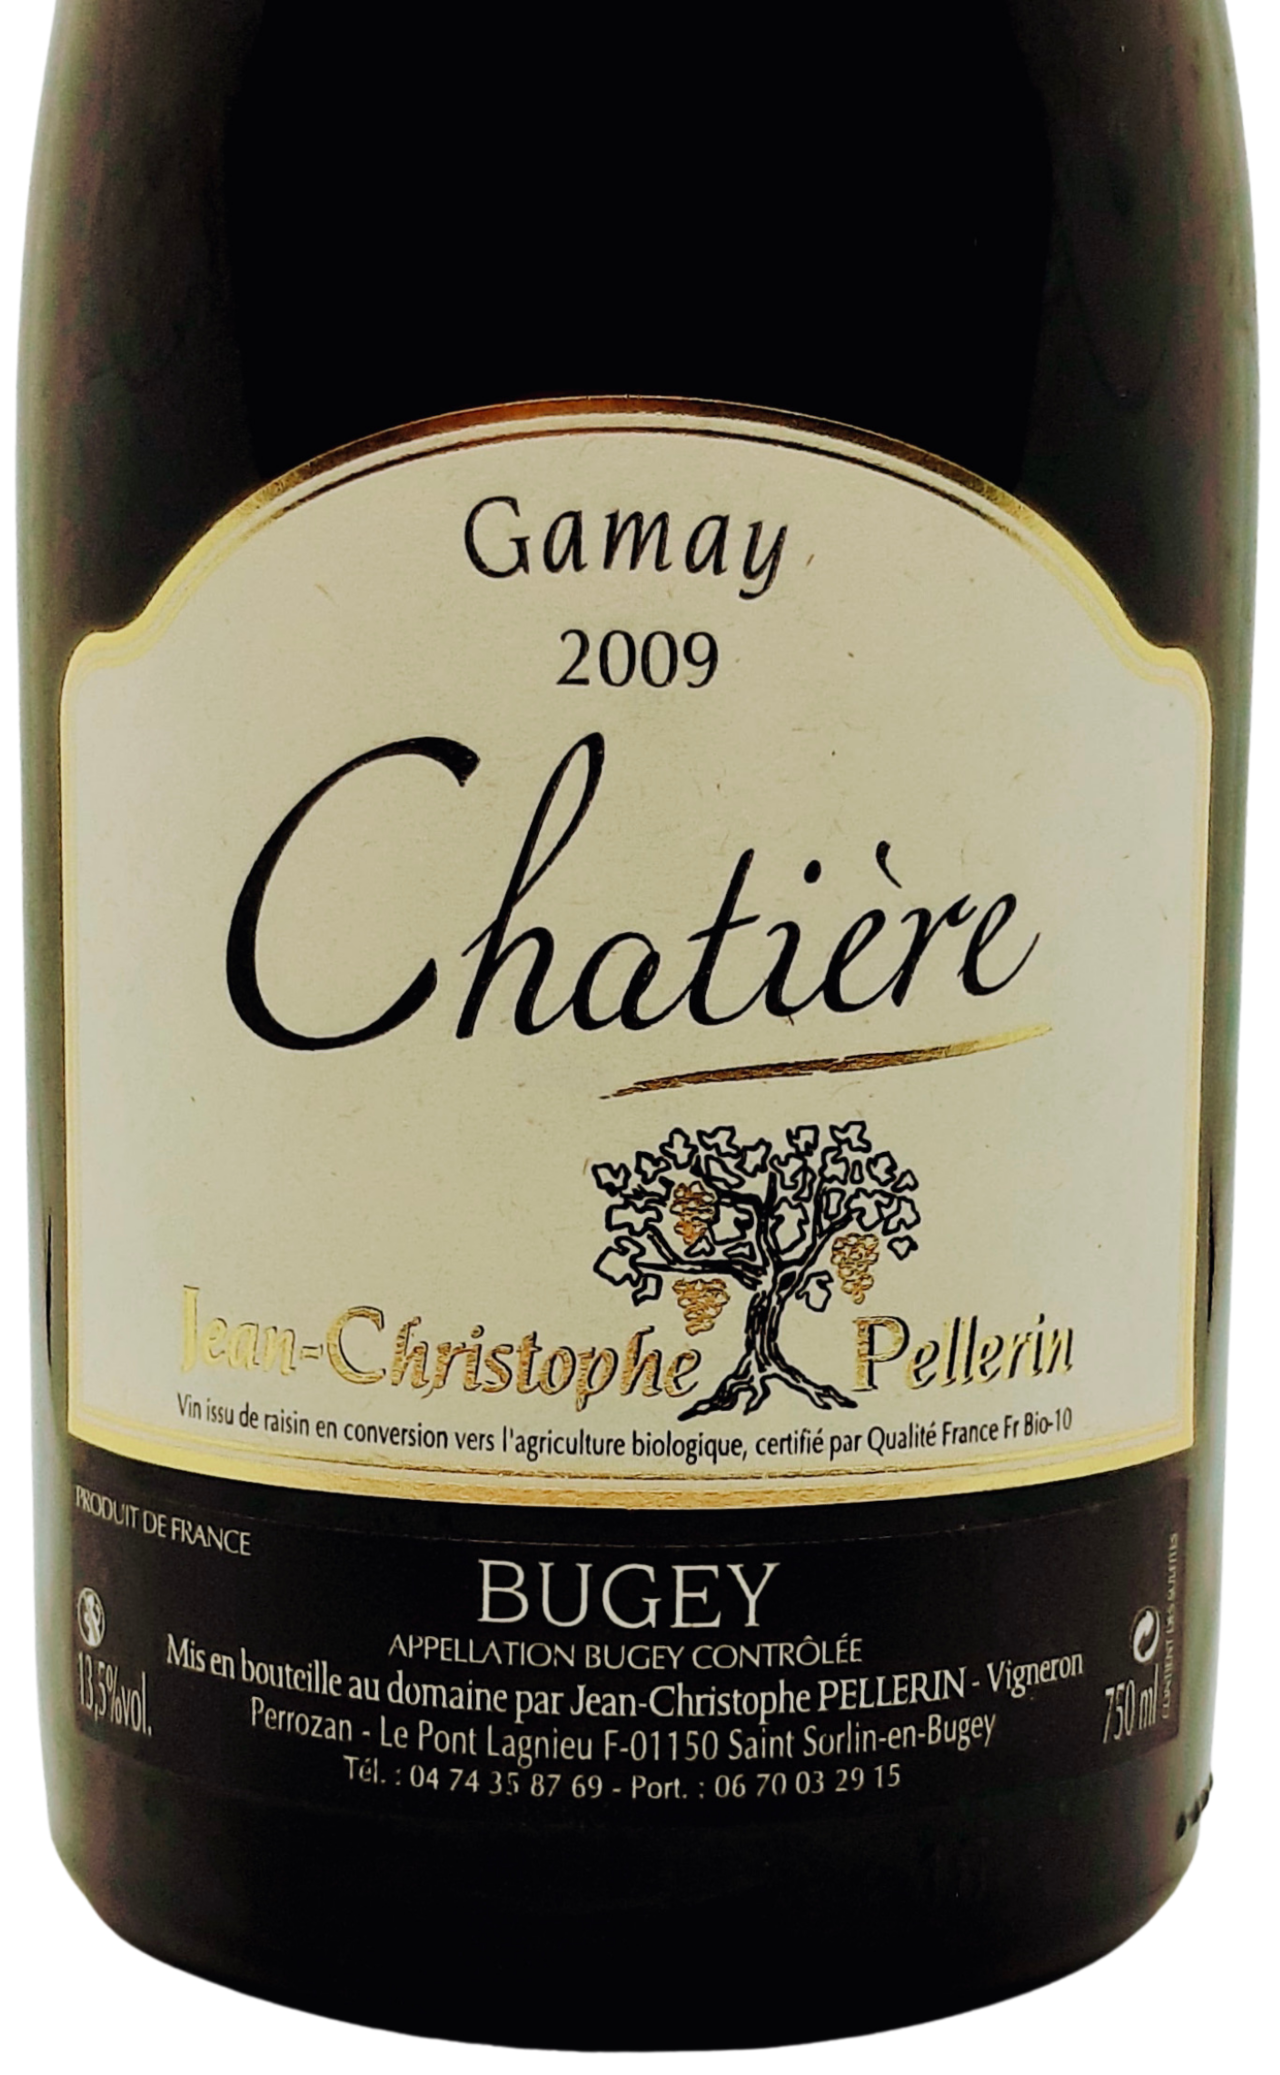 Bugey rouge Chatière Gamay 2009